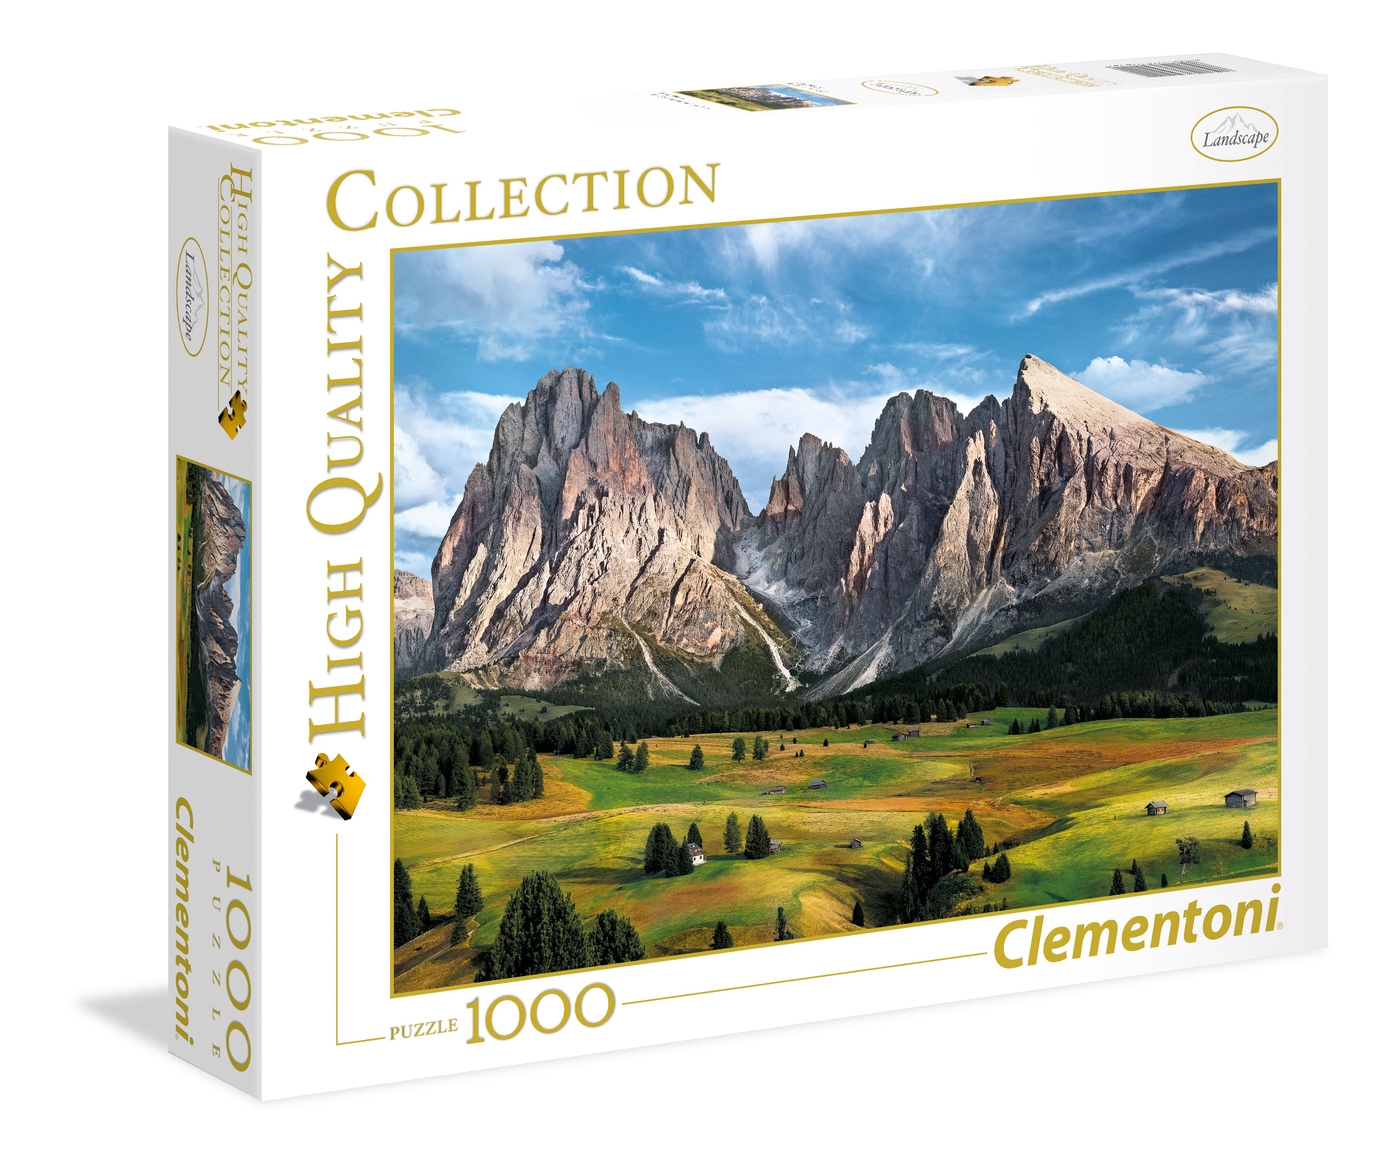 CLEMENTONI ΠΑΖΛ 1000 τεμ. HIGH QUALITY COLLECTION THE CORONATION OF THE ALPS